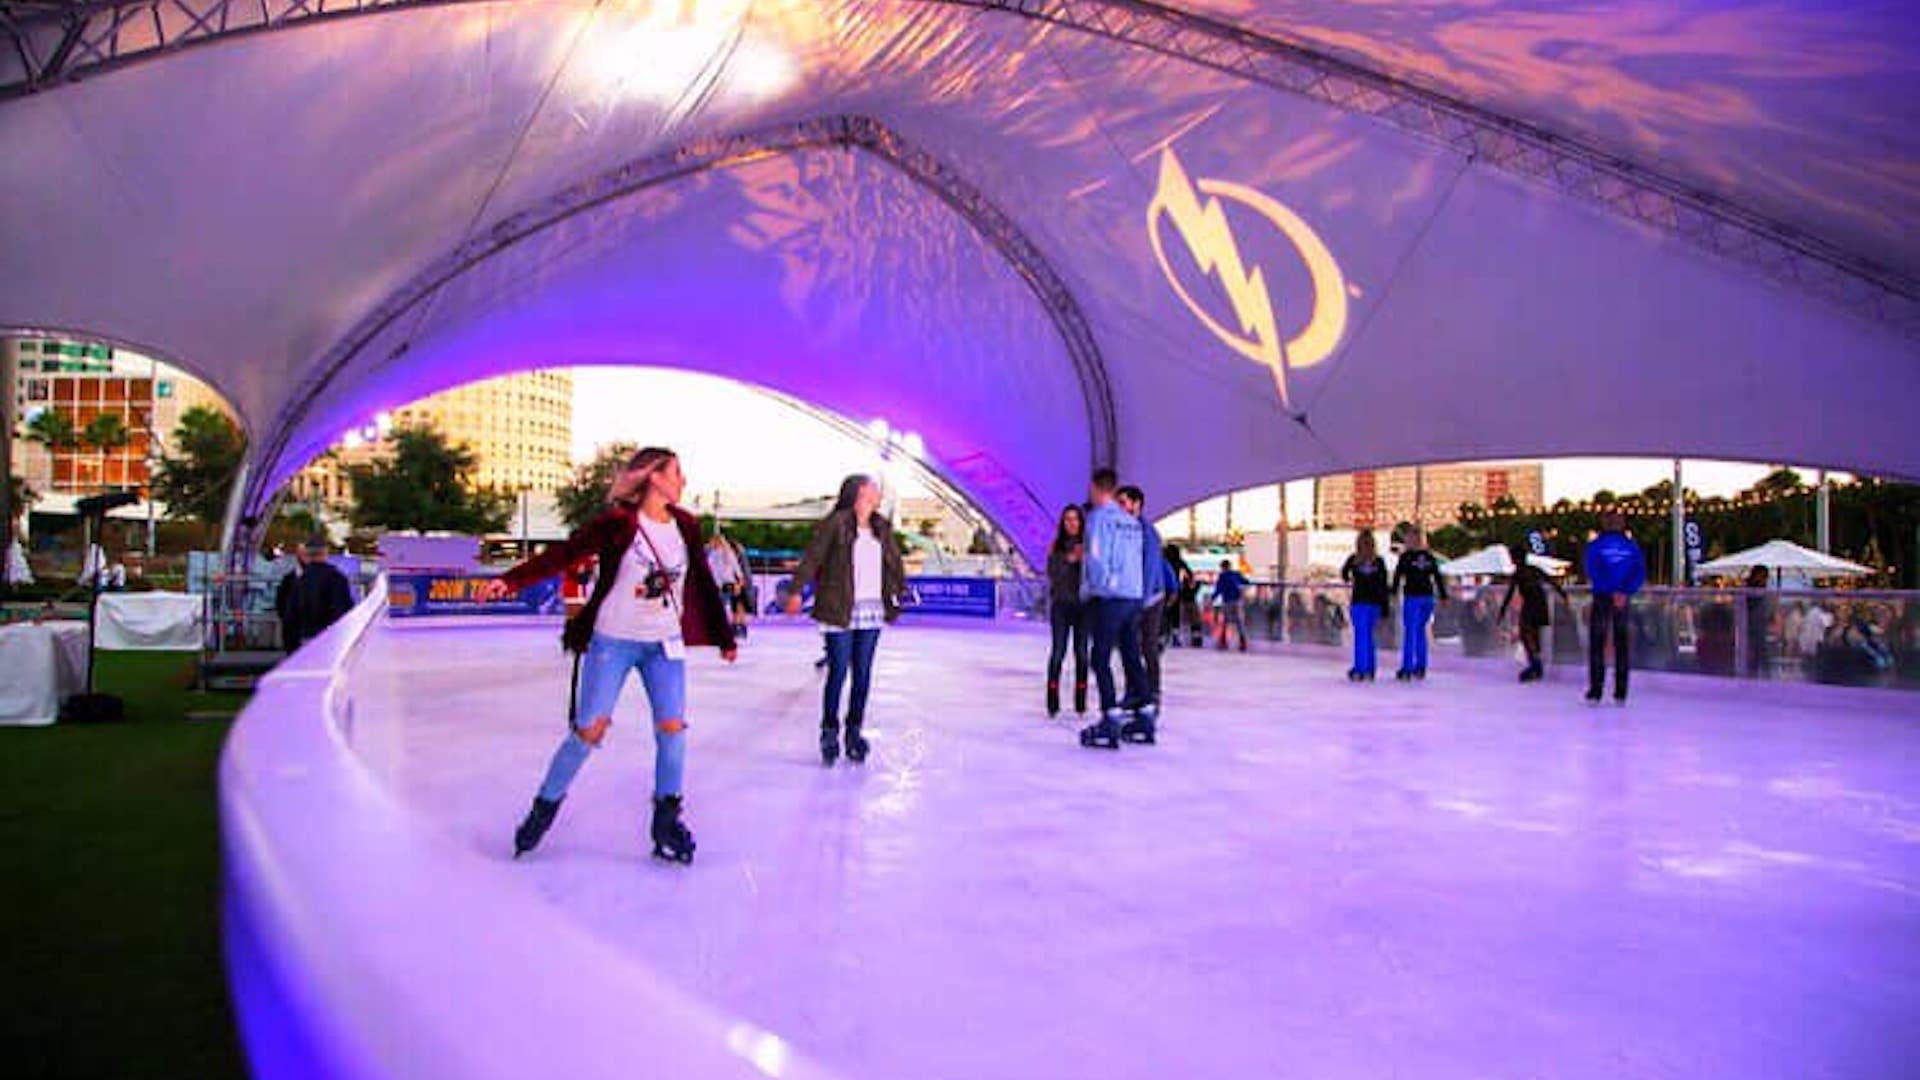 Inside the Curtis Hixon Park waterfront skating rink with purple and blue lights